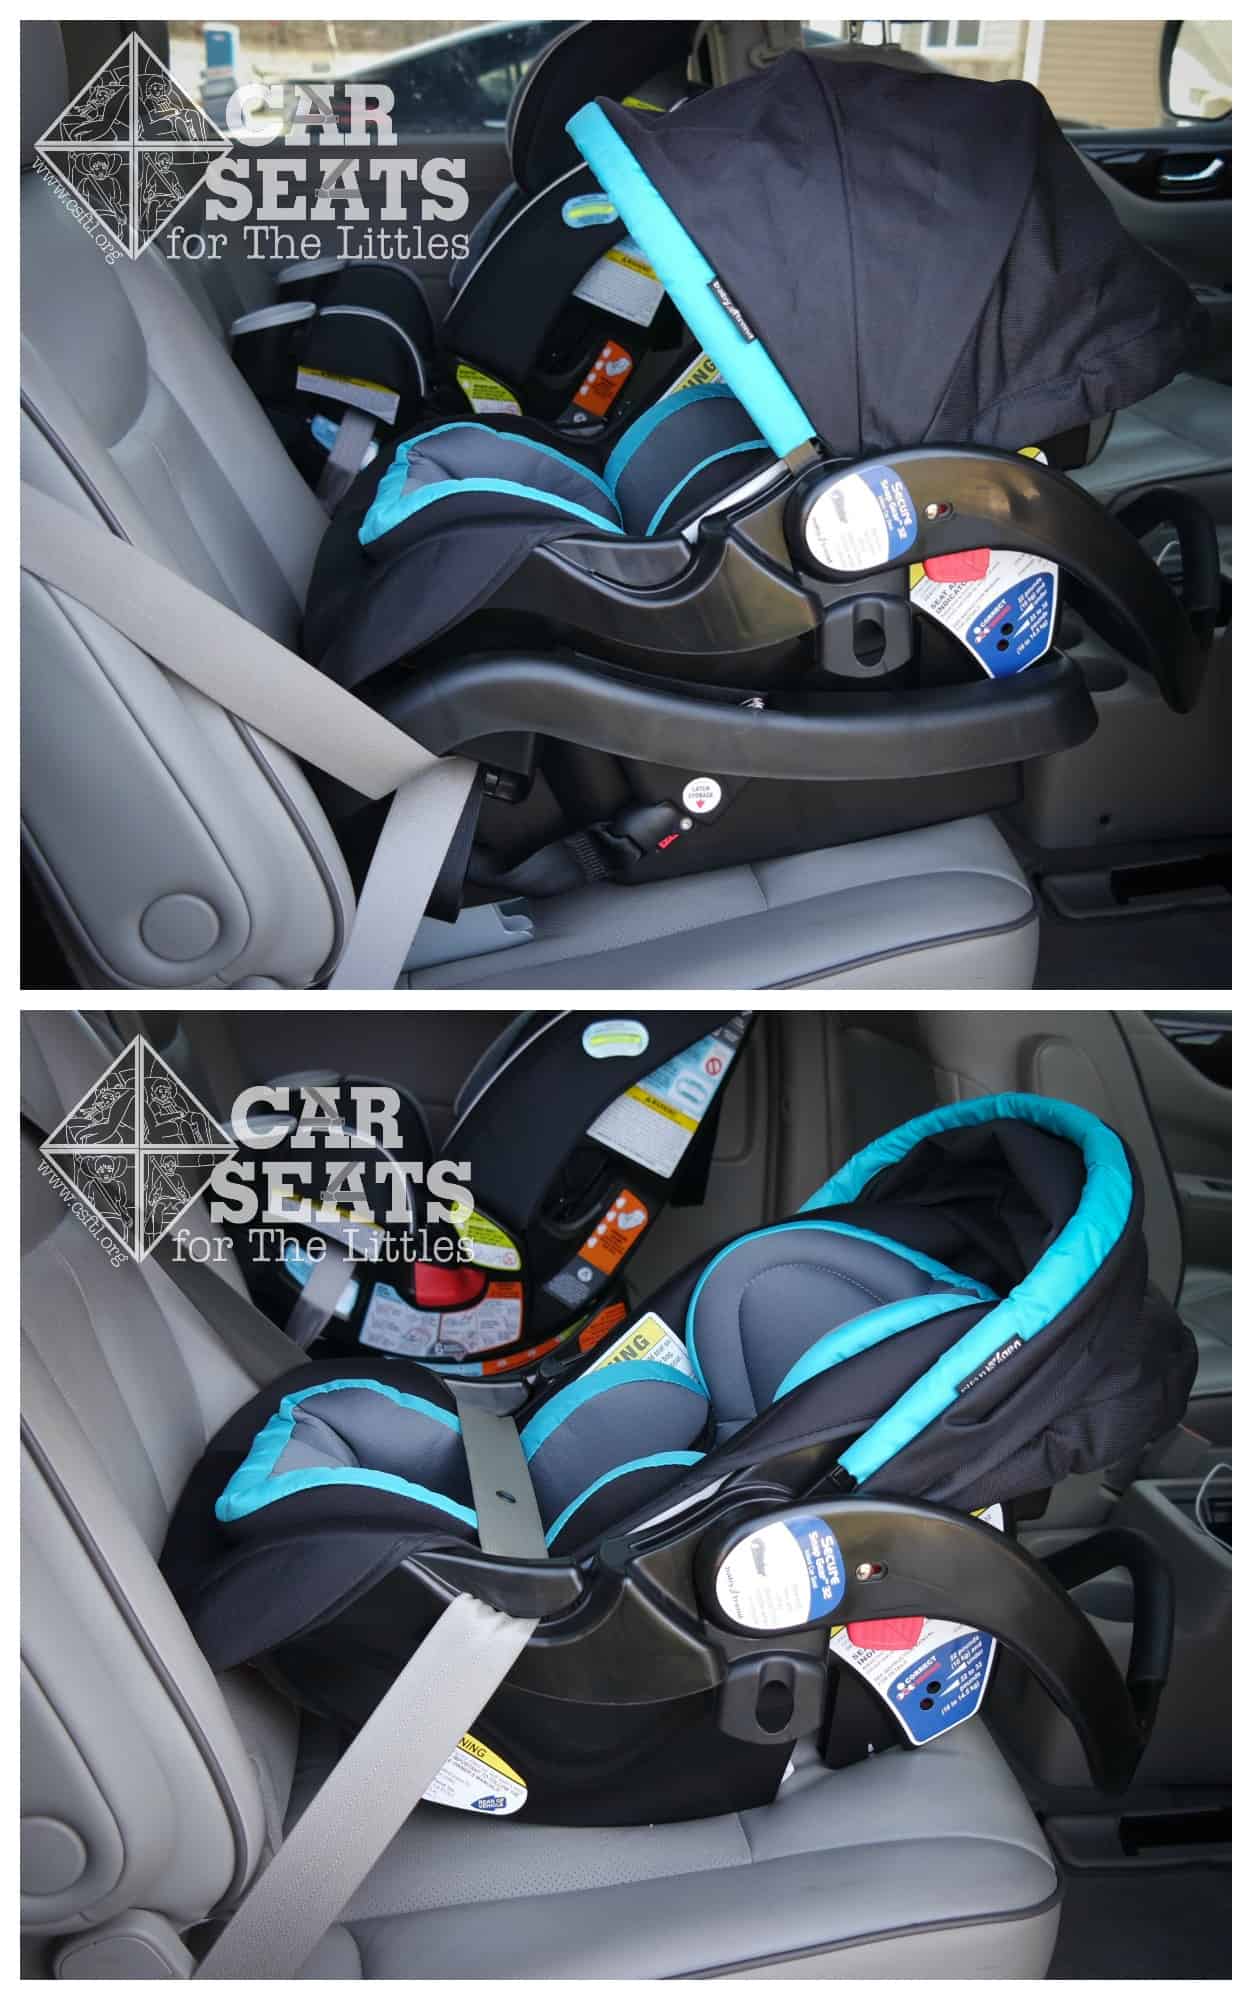 Installing Baby Trend Car Seat Base, How To Install Baby Trend Car Seat With Seatbelt